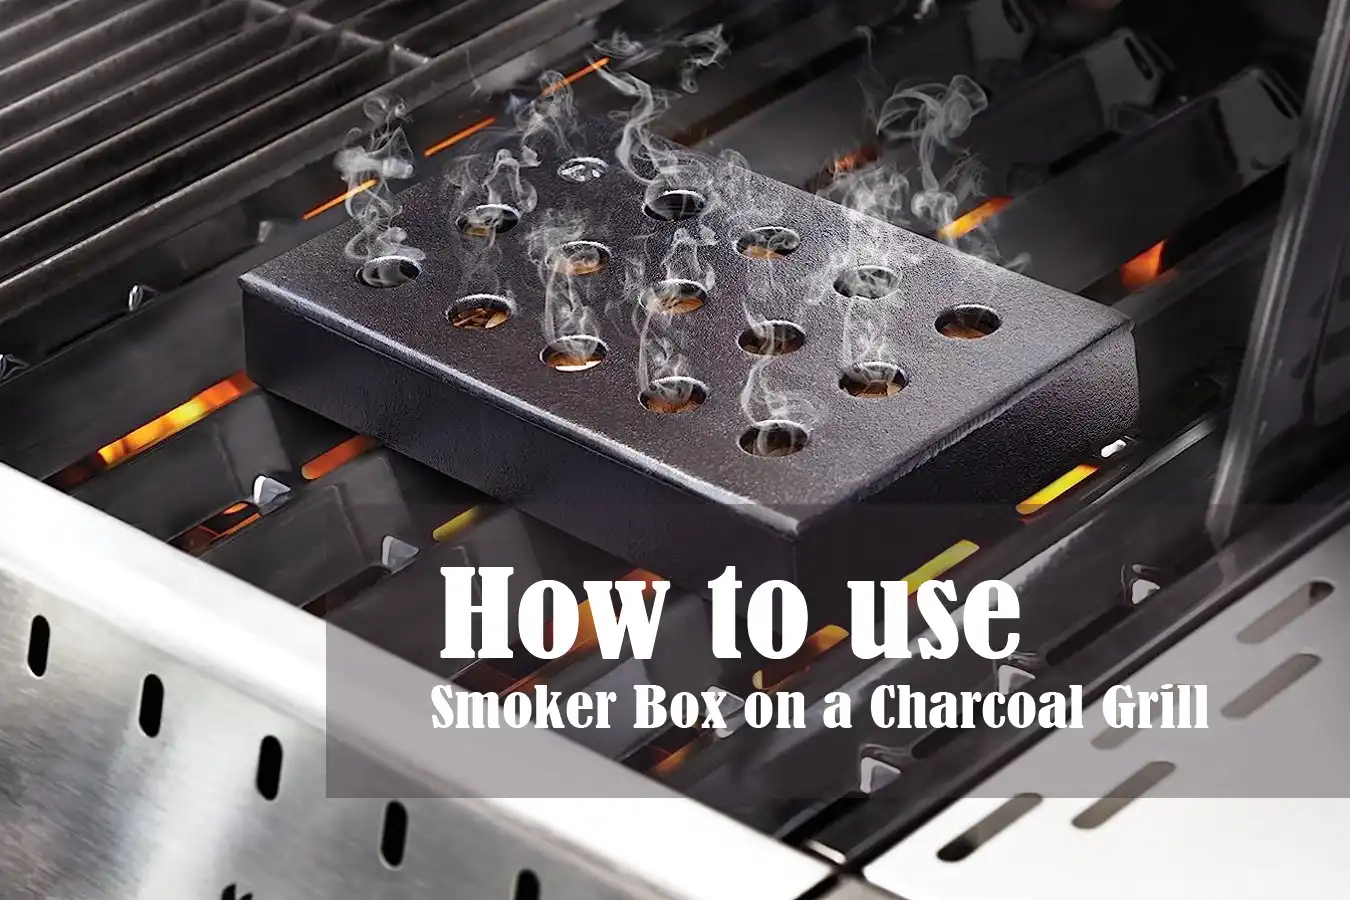 How to Use a Smoker Box on a Charcoal Grill